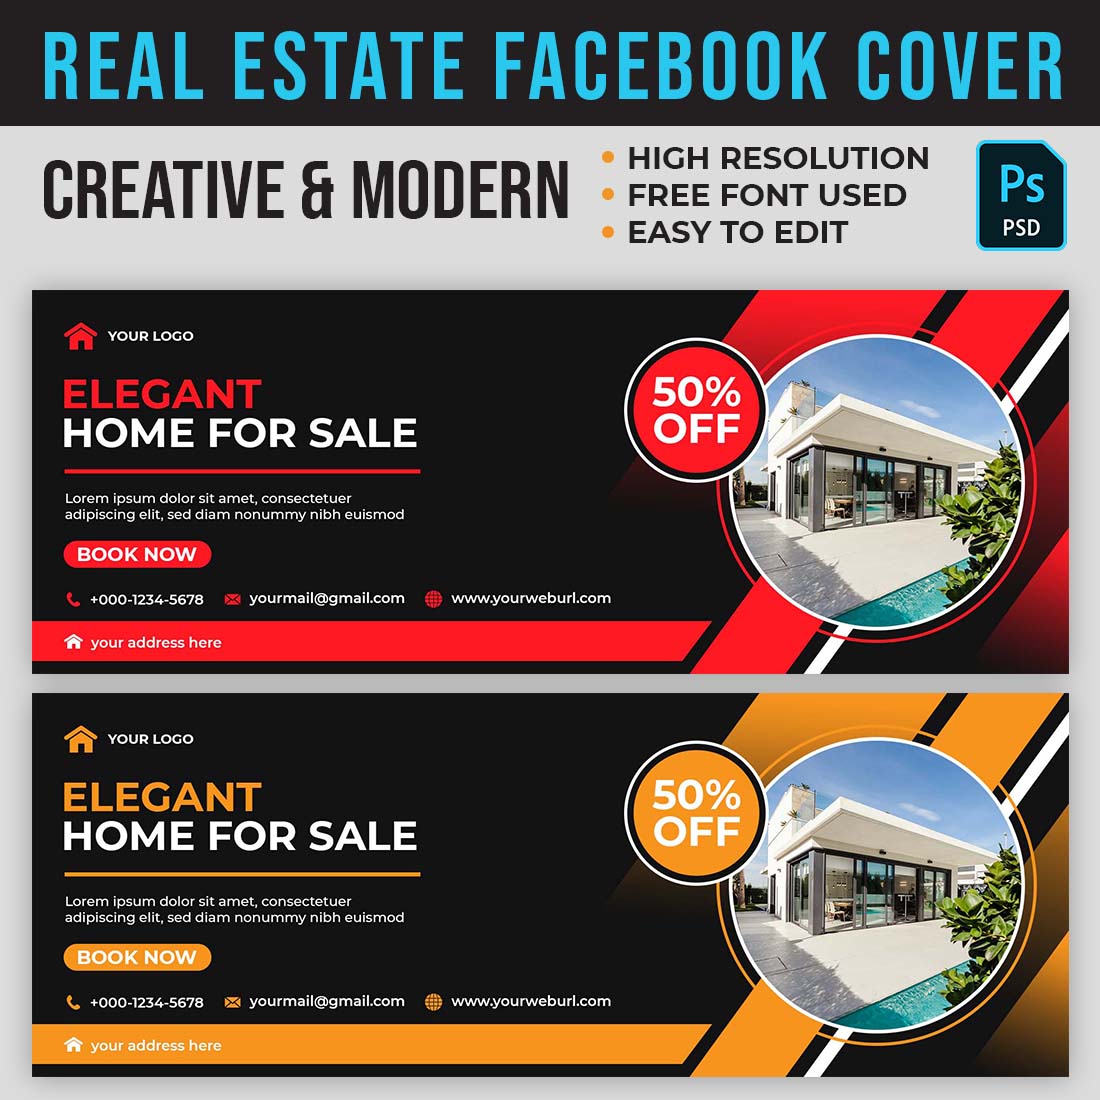 Real Estate Facebook Cover preview image.